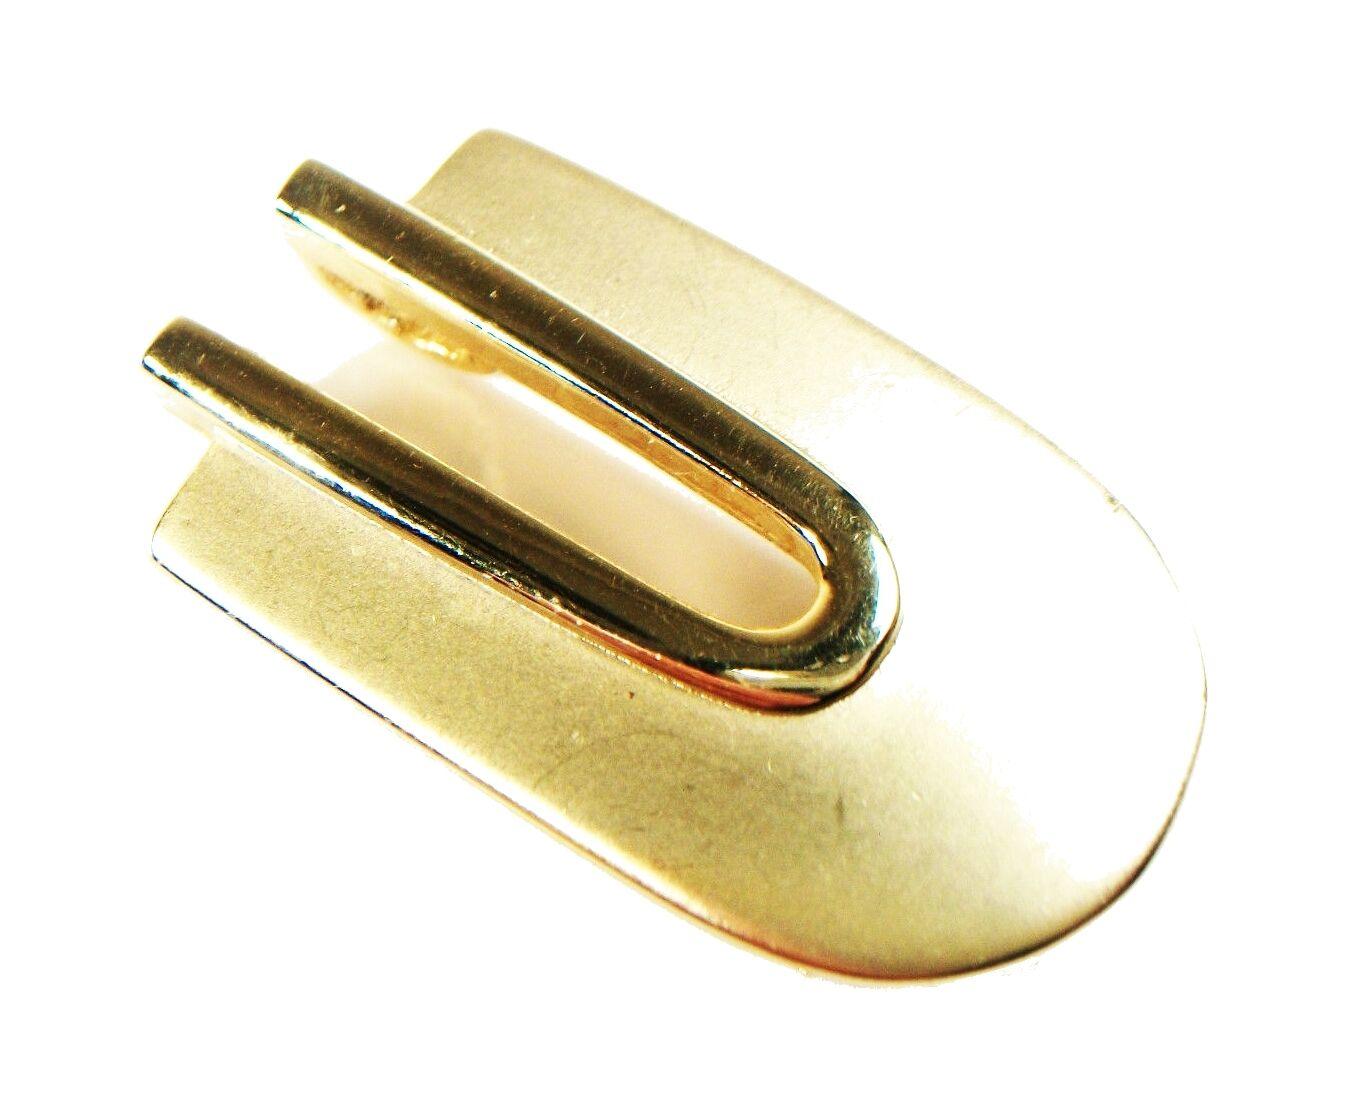 BERGÈRE - Modernist style gold tone brooch or pendant - signed - United States - mid 20th century.

Excellent vintage condition - no loss - no damage - no repairs - fine surface scratches from age and use - ready to wear.

Size - 3/4